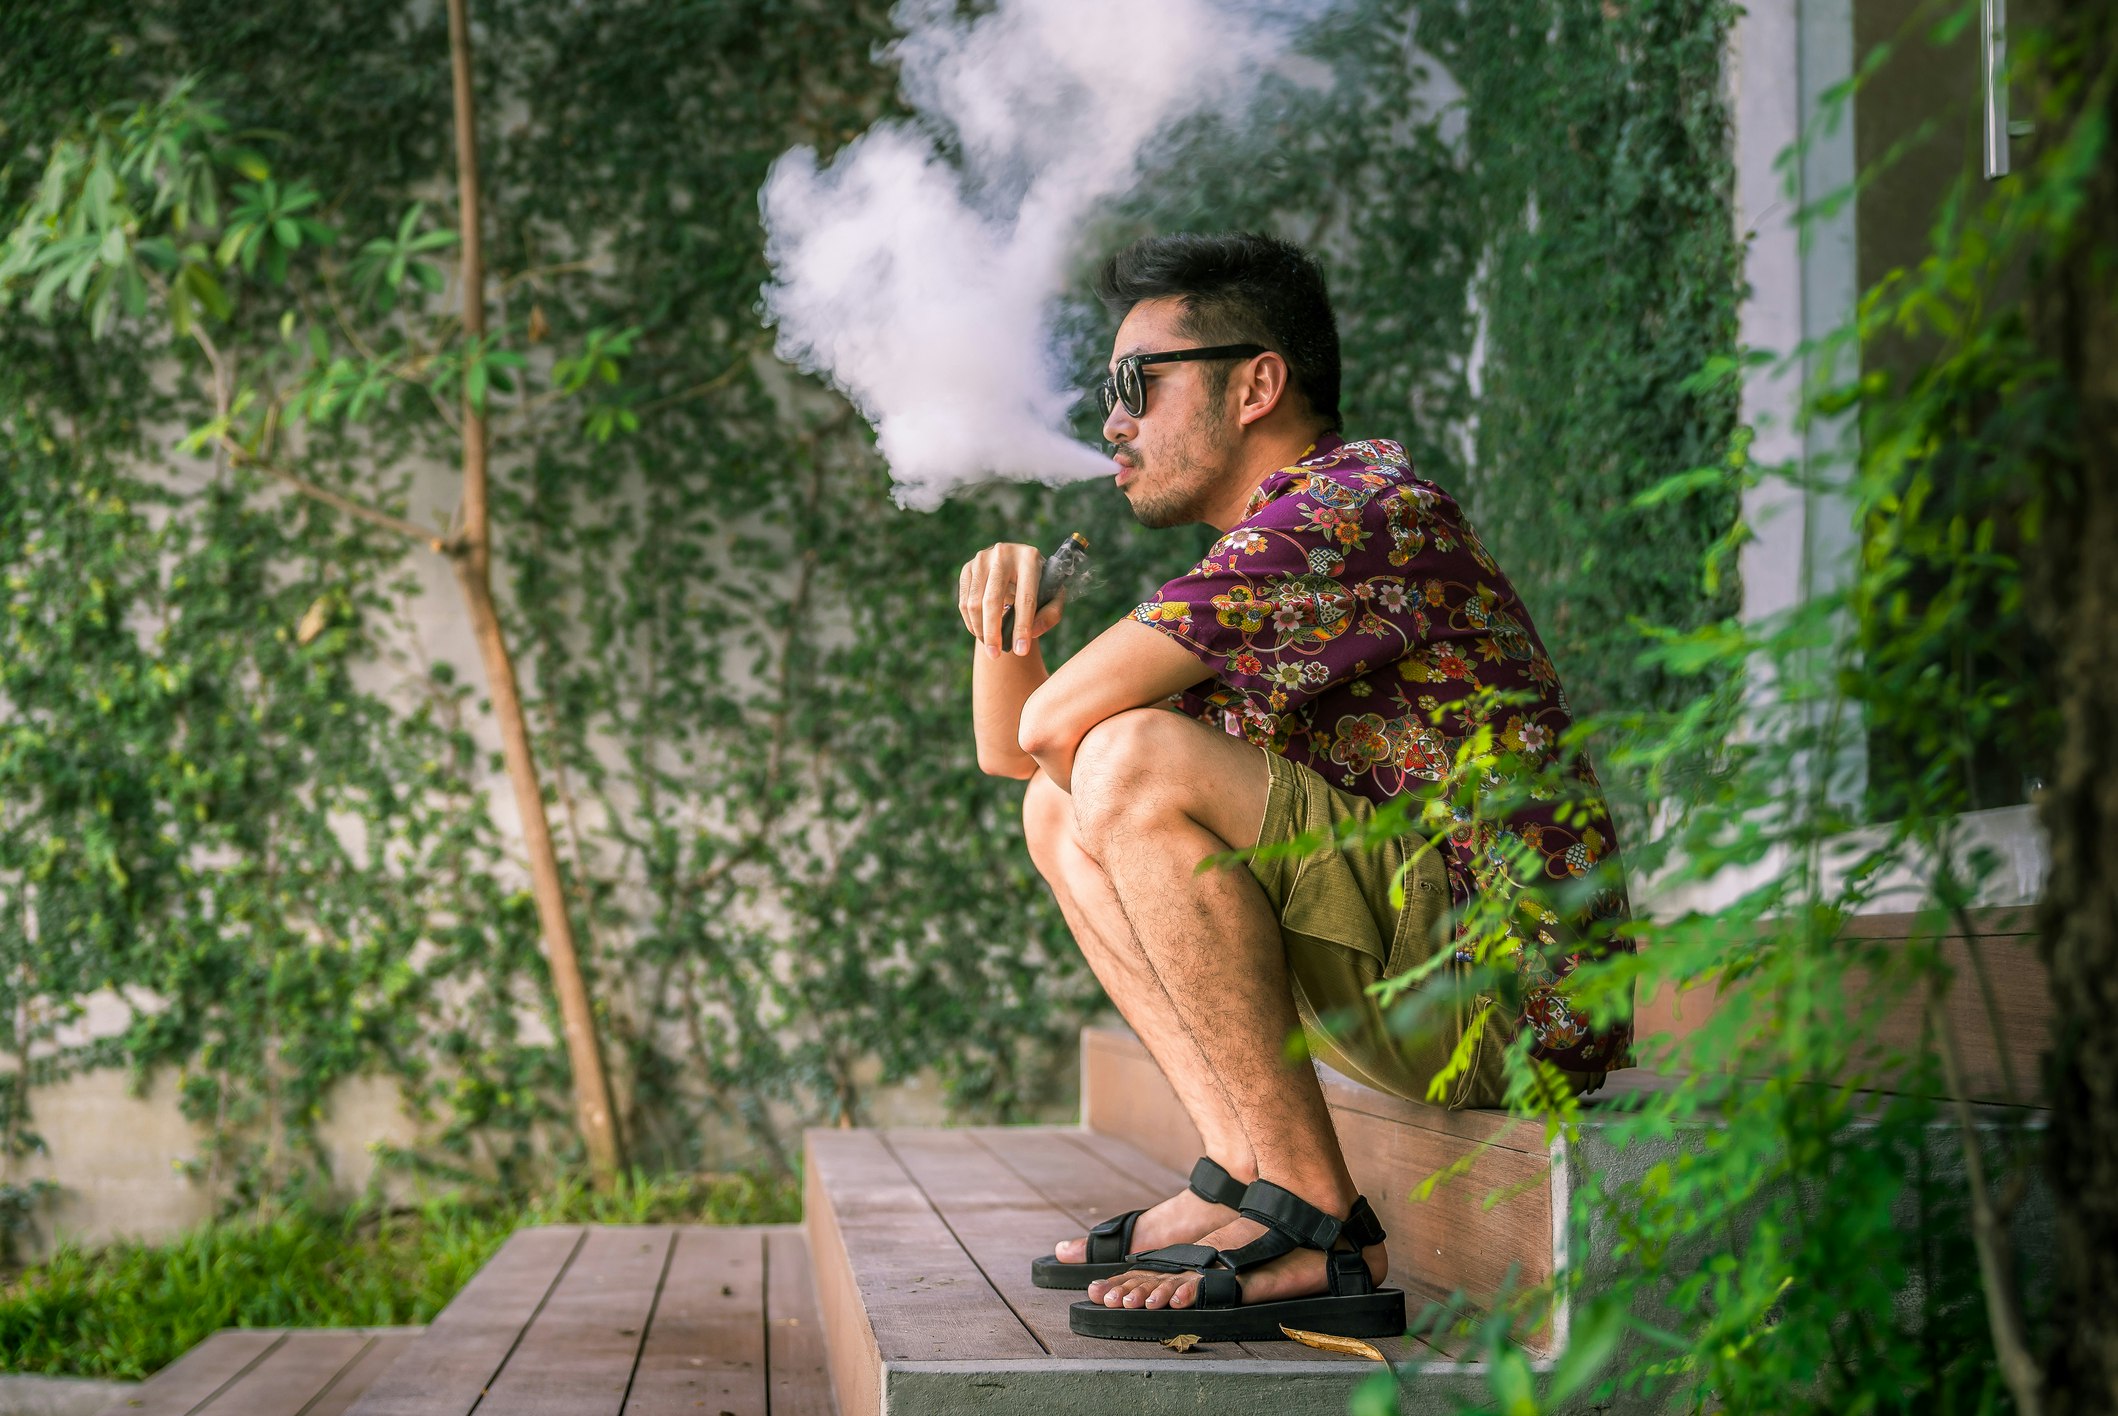 Man smoking an electric cigarette sitting on a step